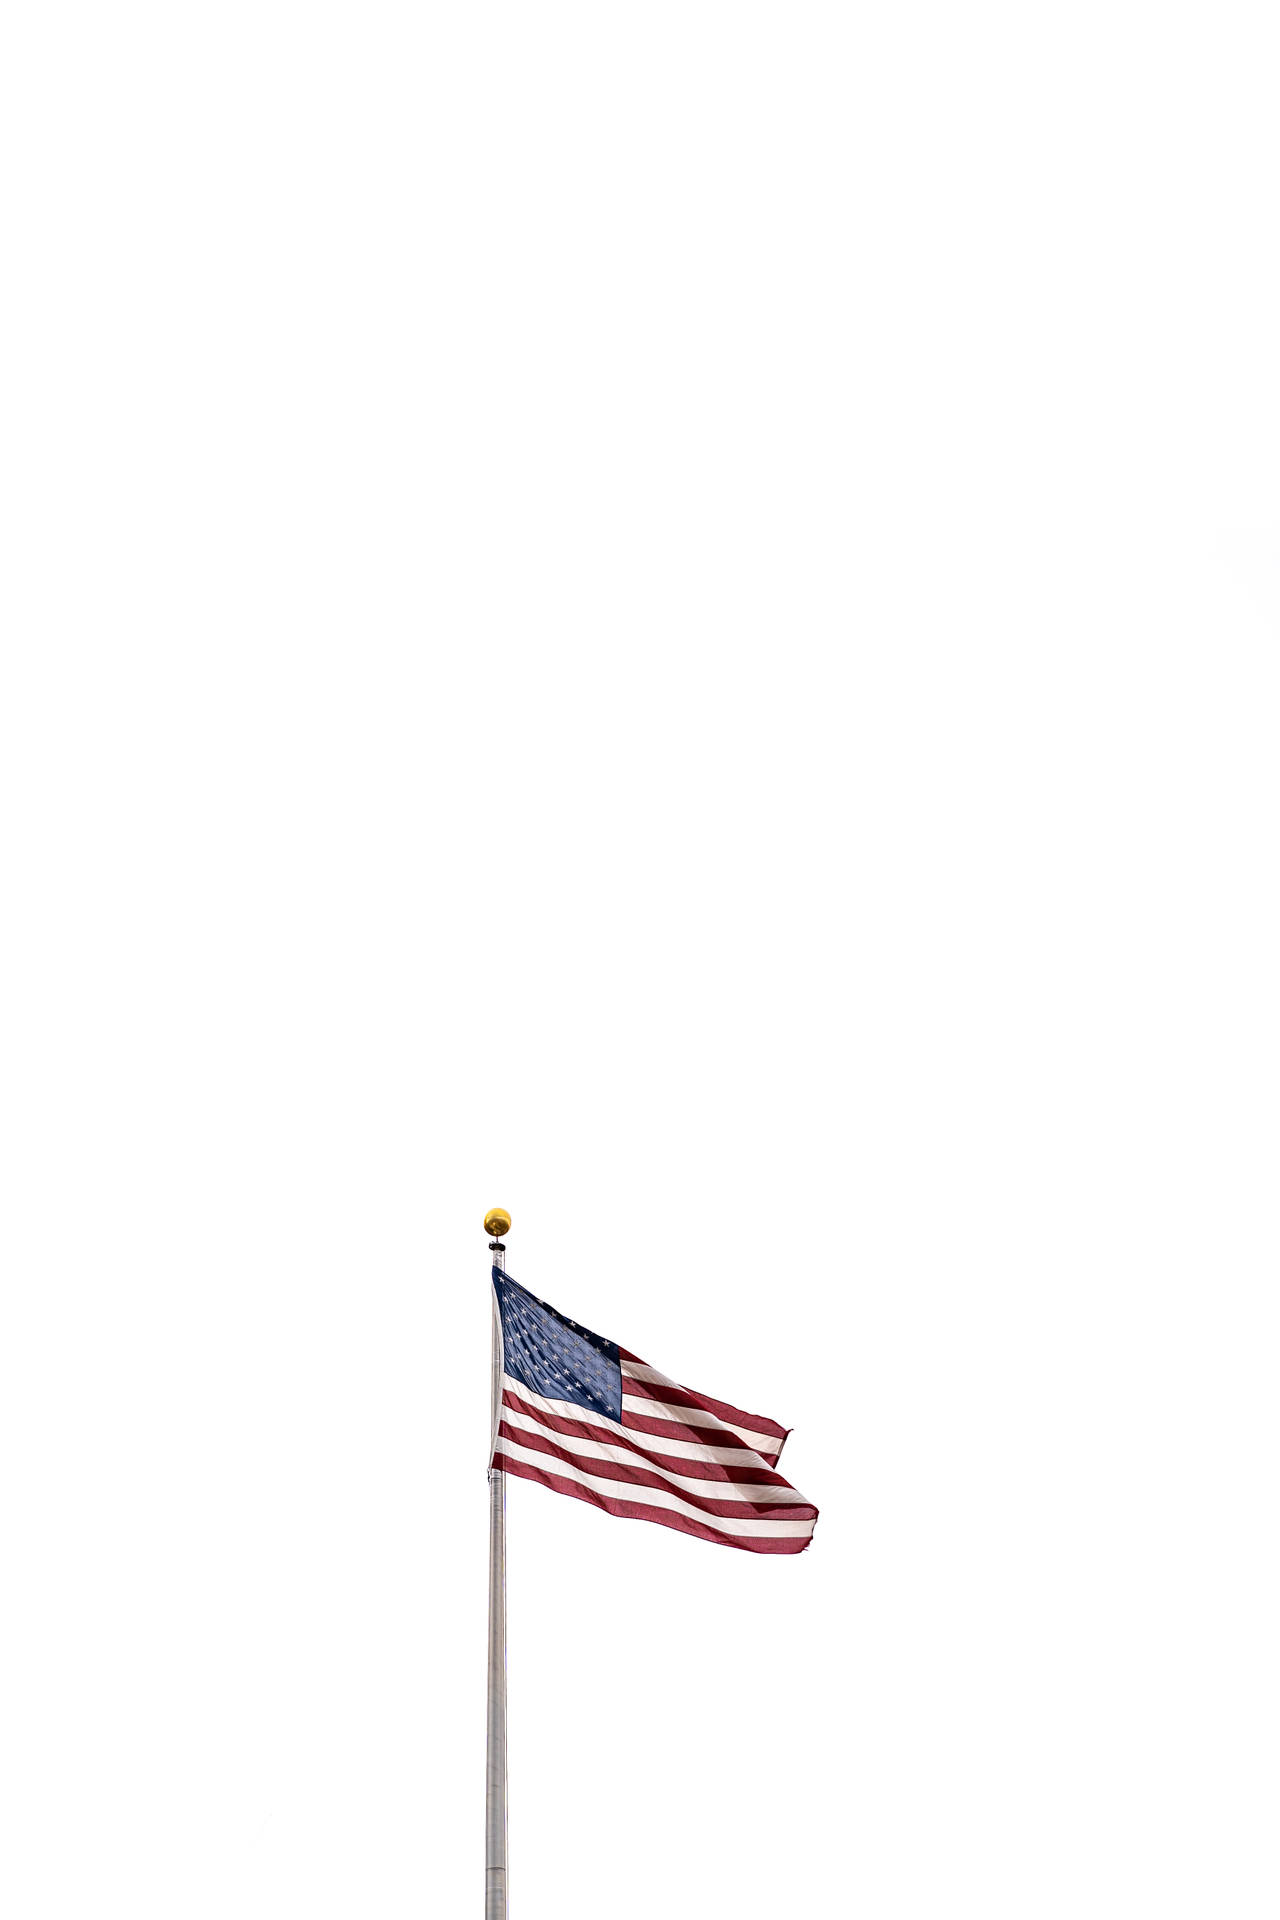 3586X5379 American Flag Wallpaper and Background